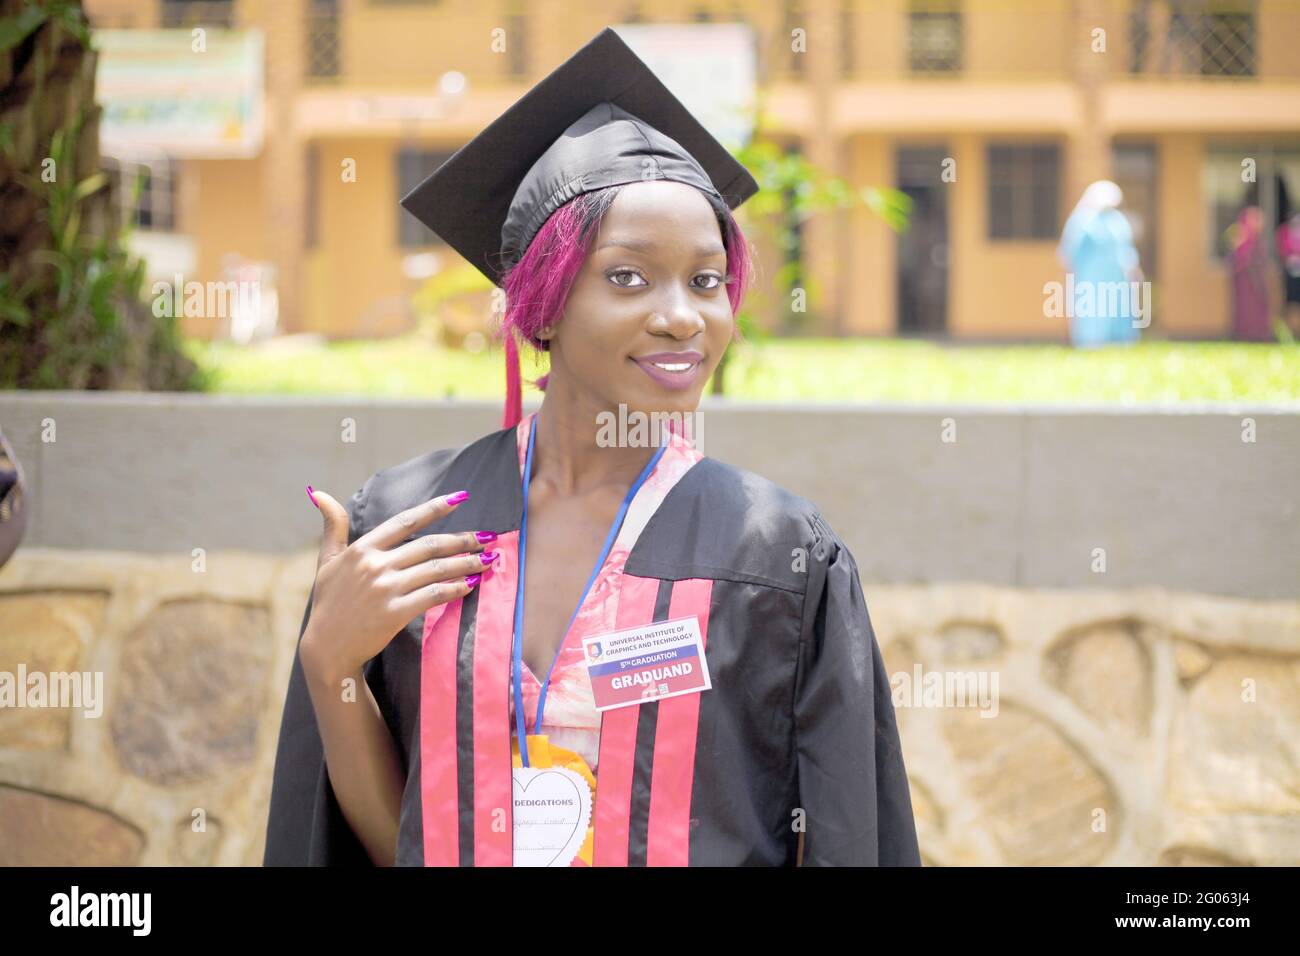 KAMPALA, UGANDA - May 31, 2021: Graduate graduates with with a huge smile looking happy and is a beautiful African American lady with the blurred back Stock Photo